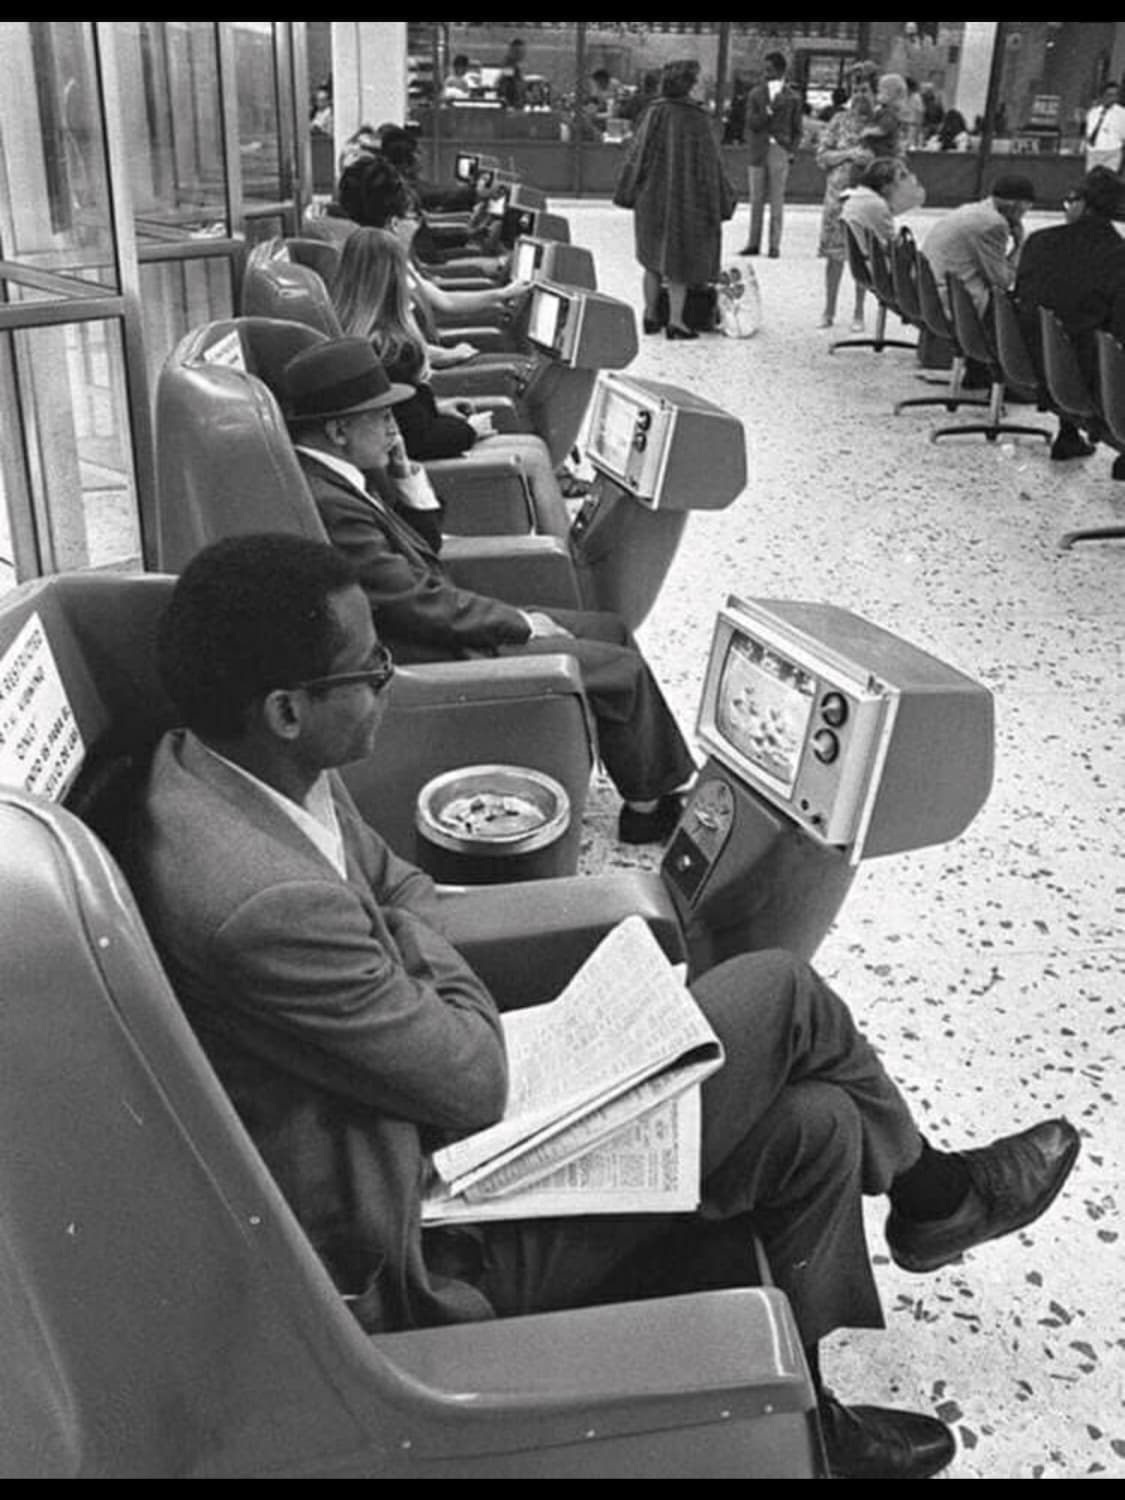 Passengers watching coin-operated TV’s in the LA Greyhound terminal in 1969.